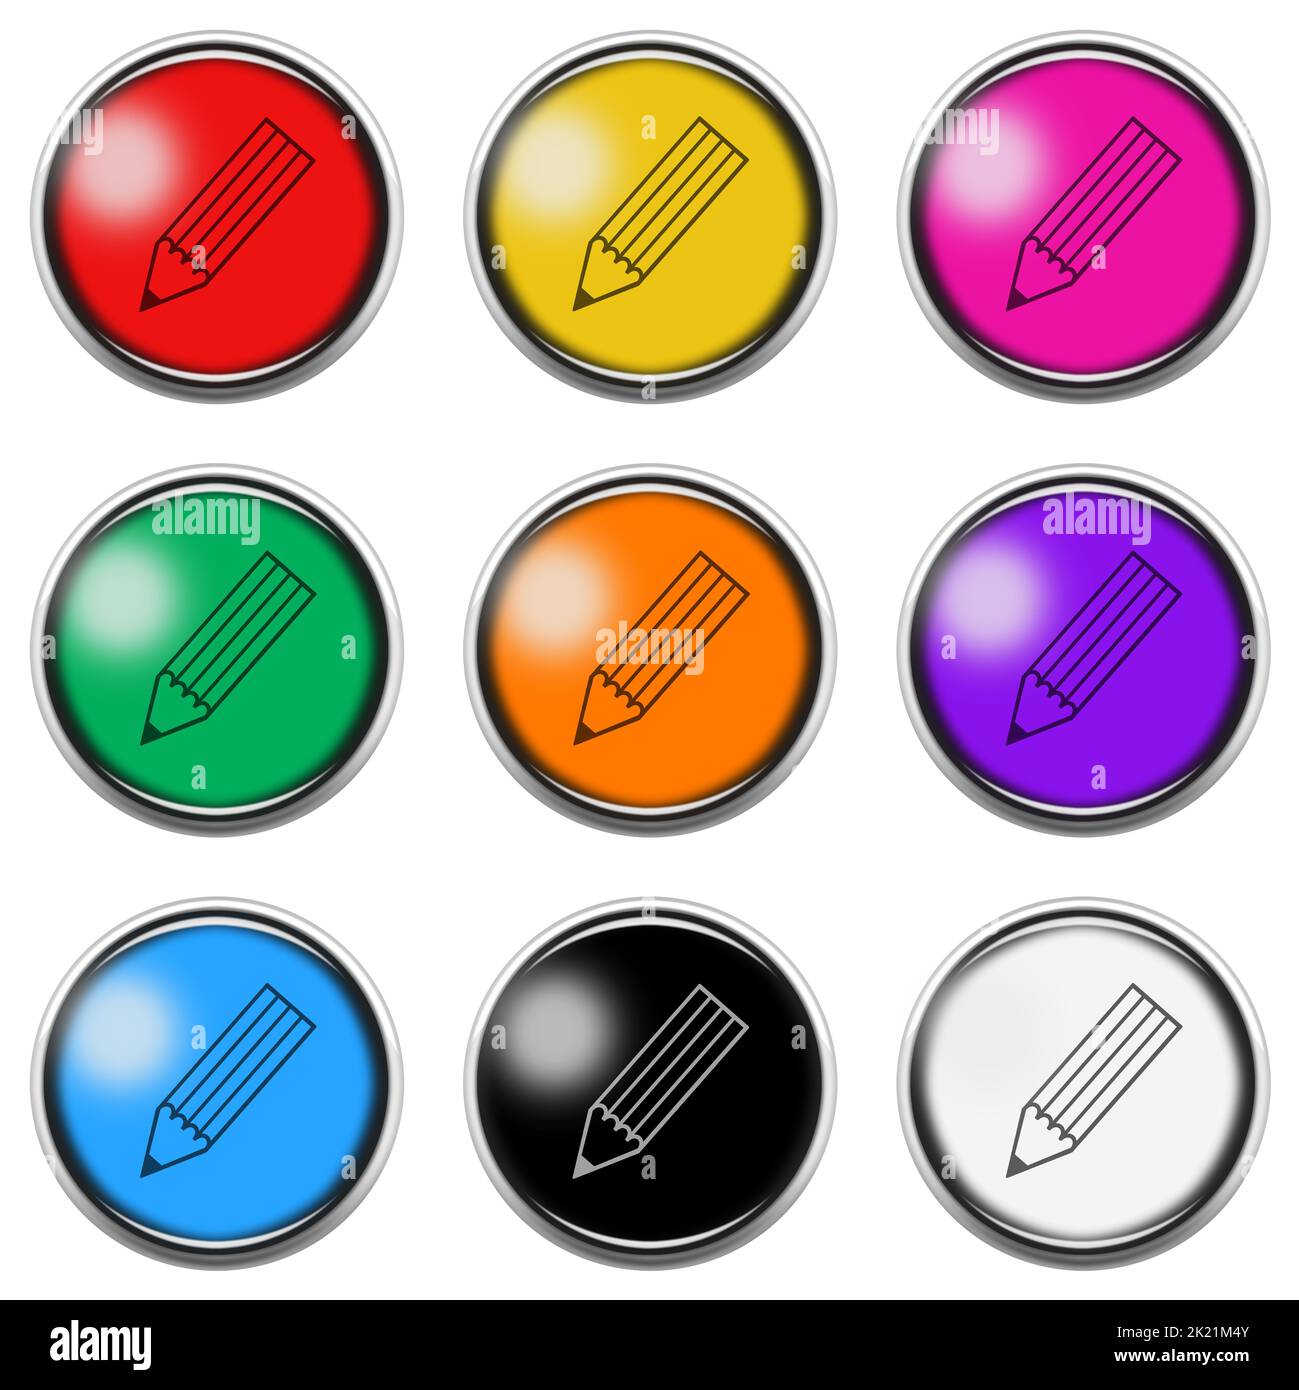 A Pencil sign button icon set isolated on white with clipping path 3d illustration Stock Photo